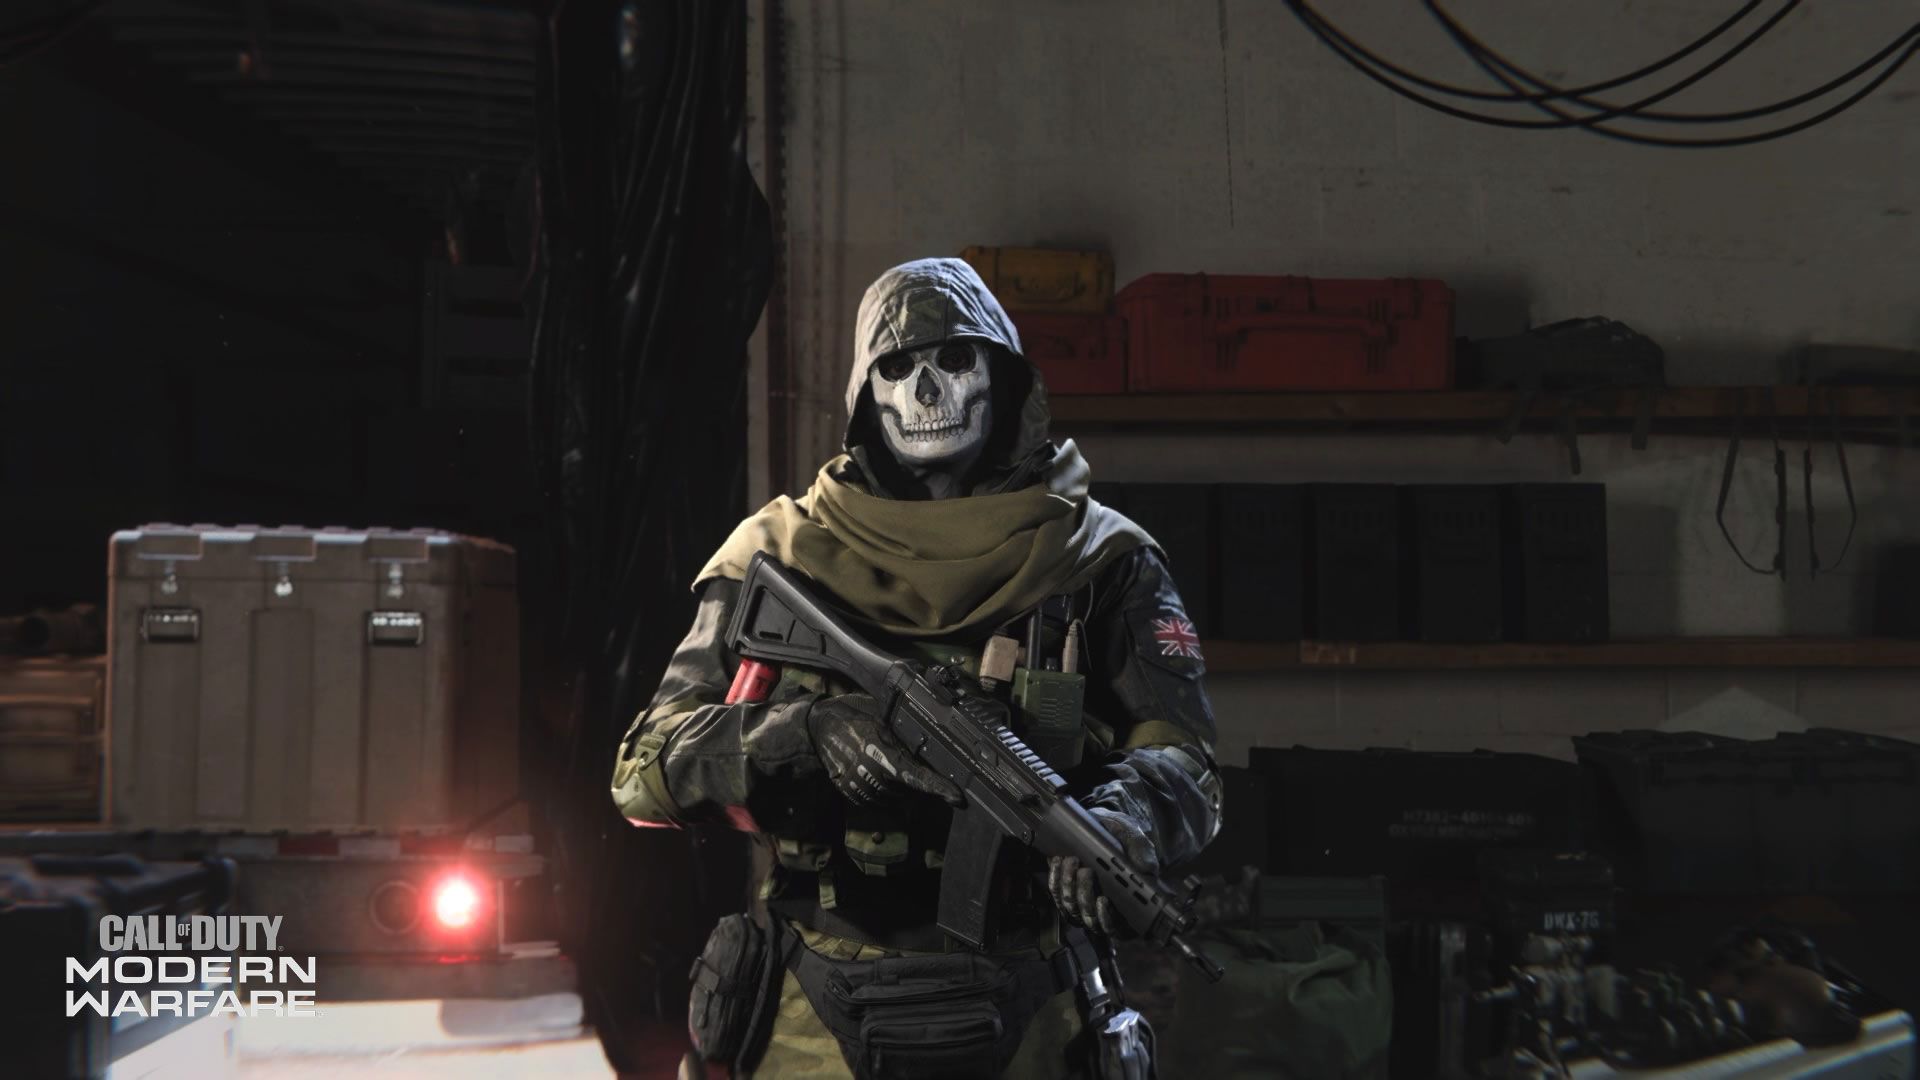 Ghost joins the Coalition Operators of Call of Duty?: Modern Warfare?